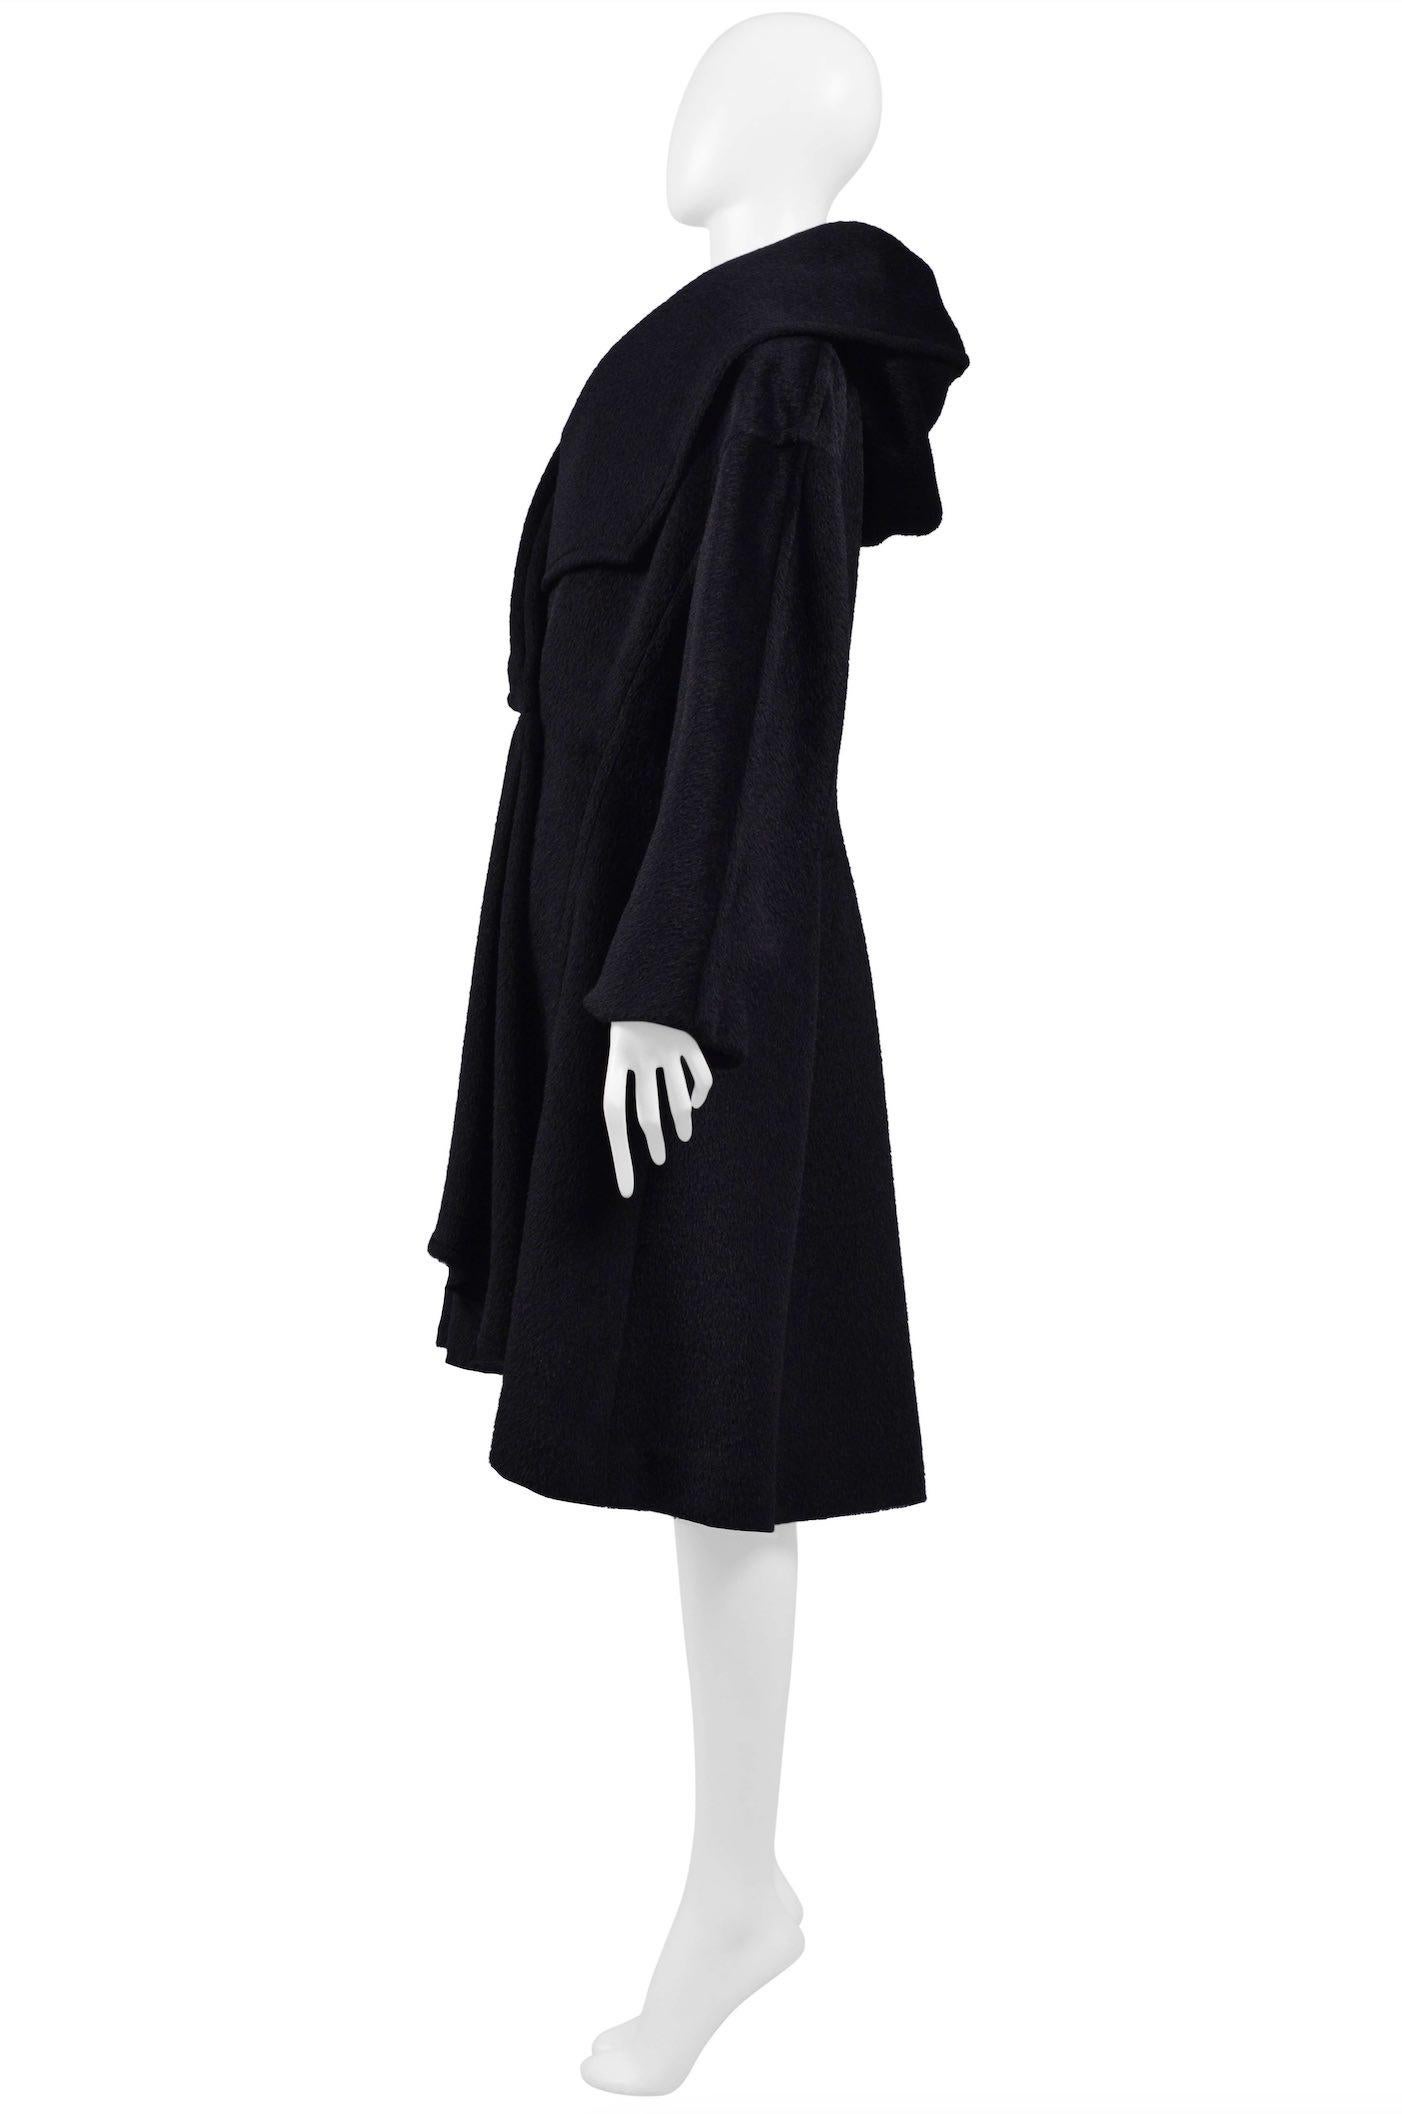 Thierry Mugler Black Alpaca Hooded Cape Coat In Good Condition For Sale In Los Angeles, CA